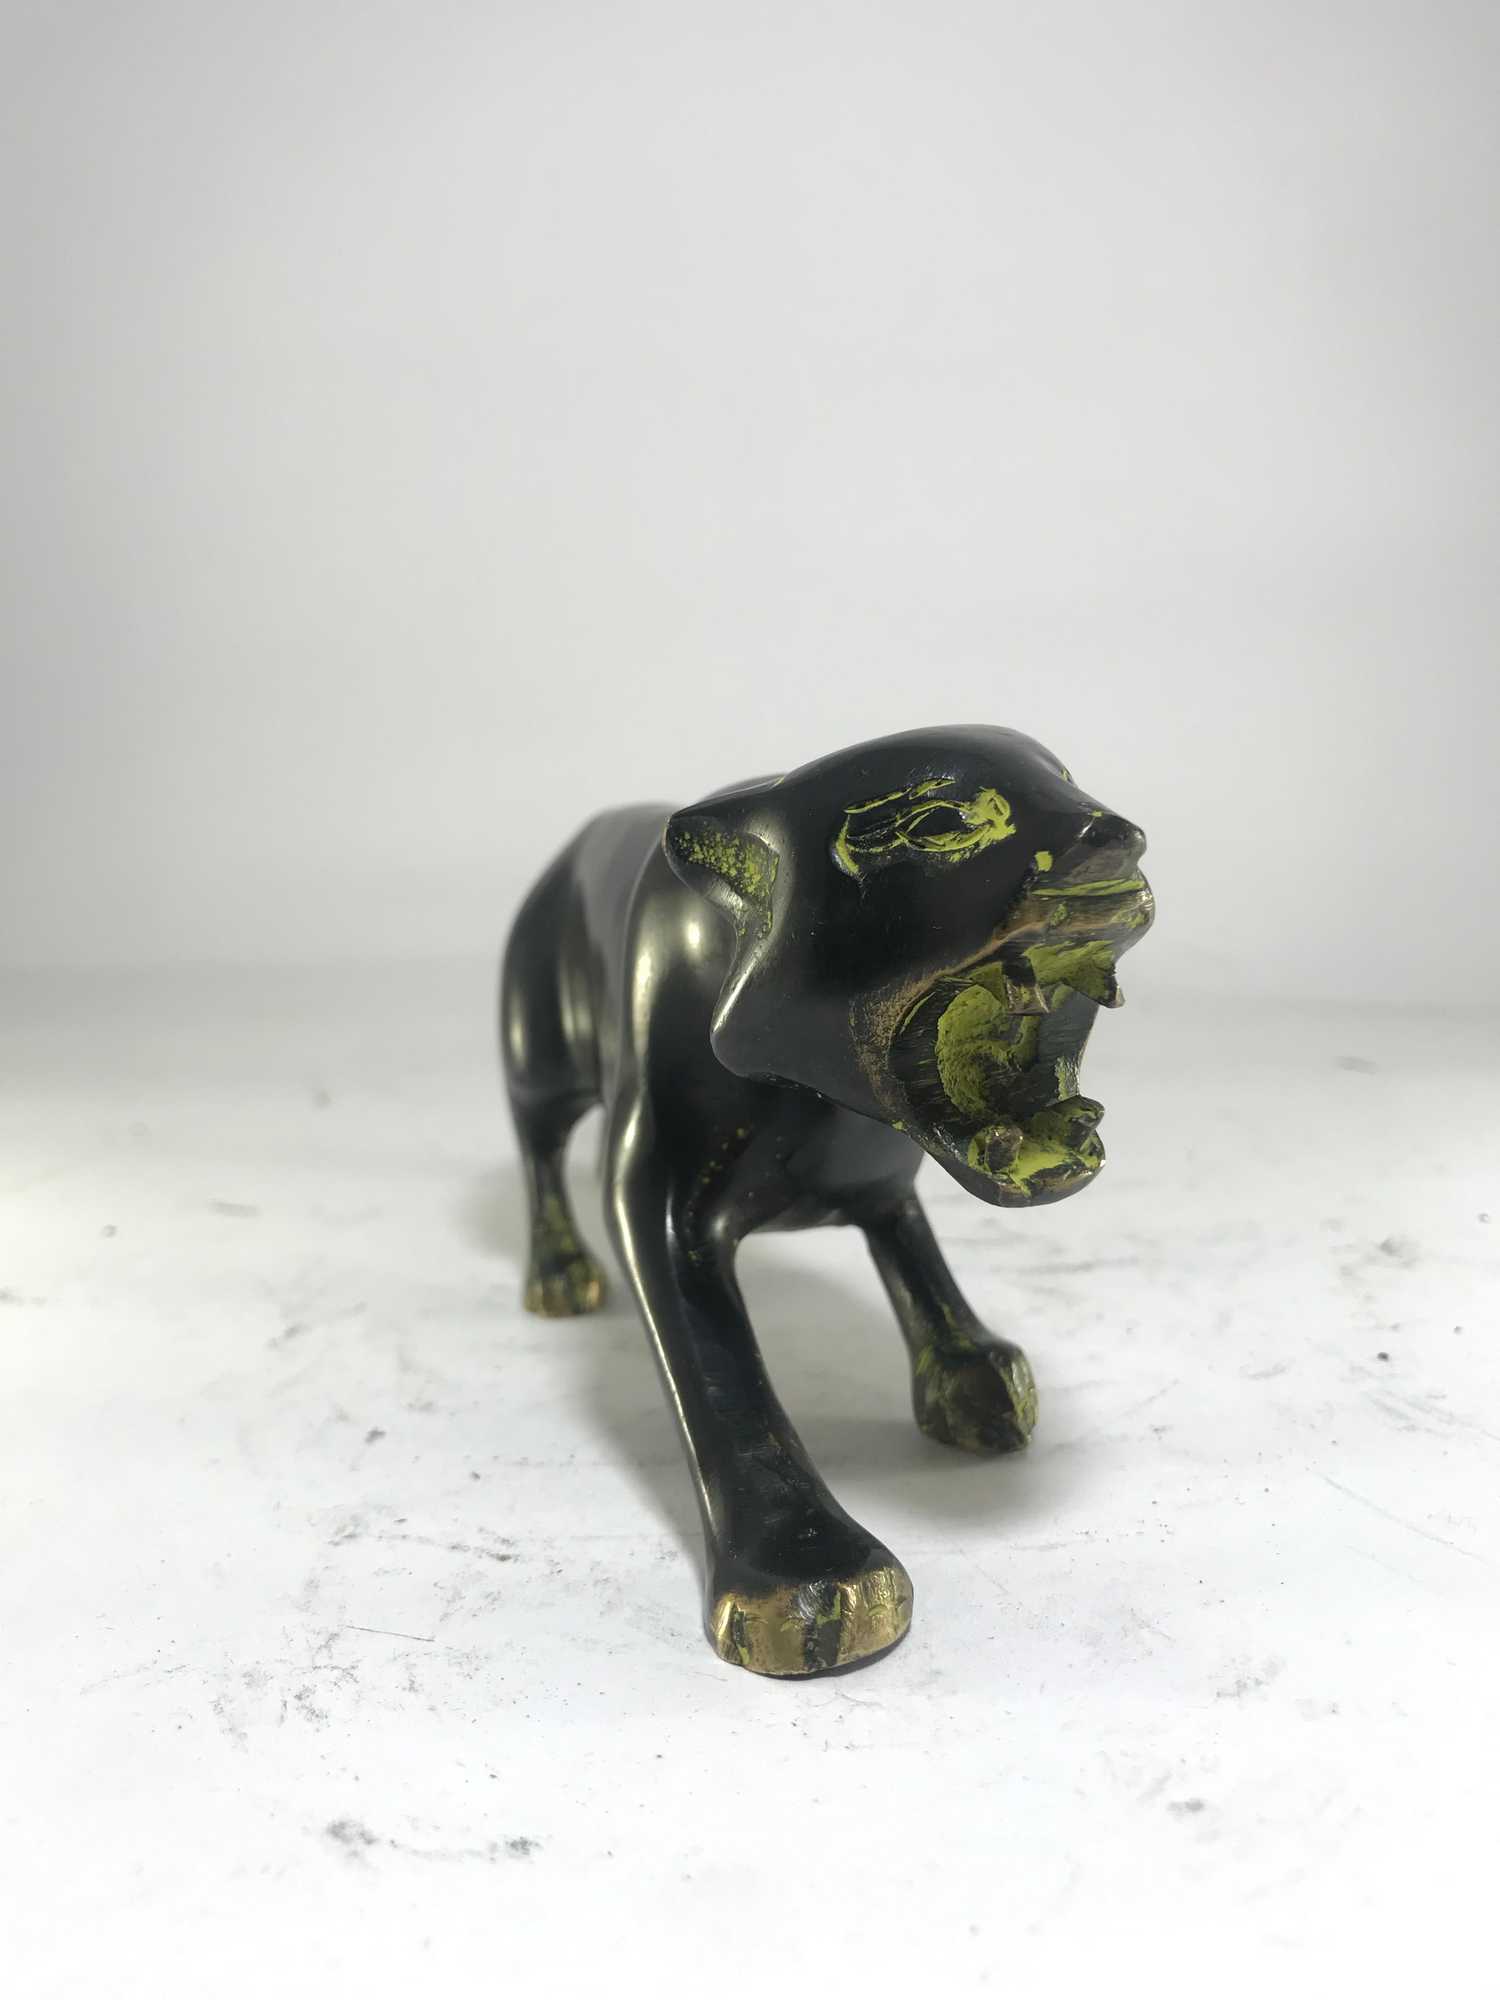 Statue Of Black Panther, antique Finishing